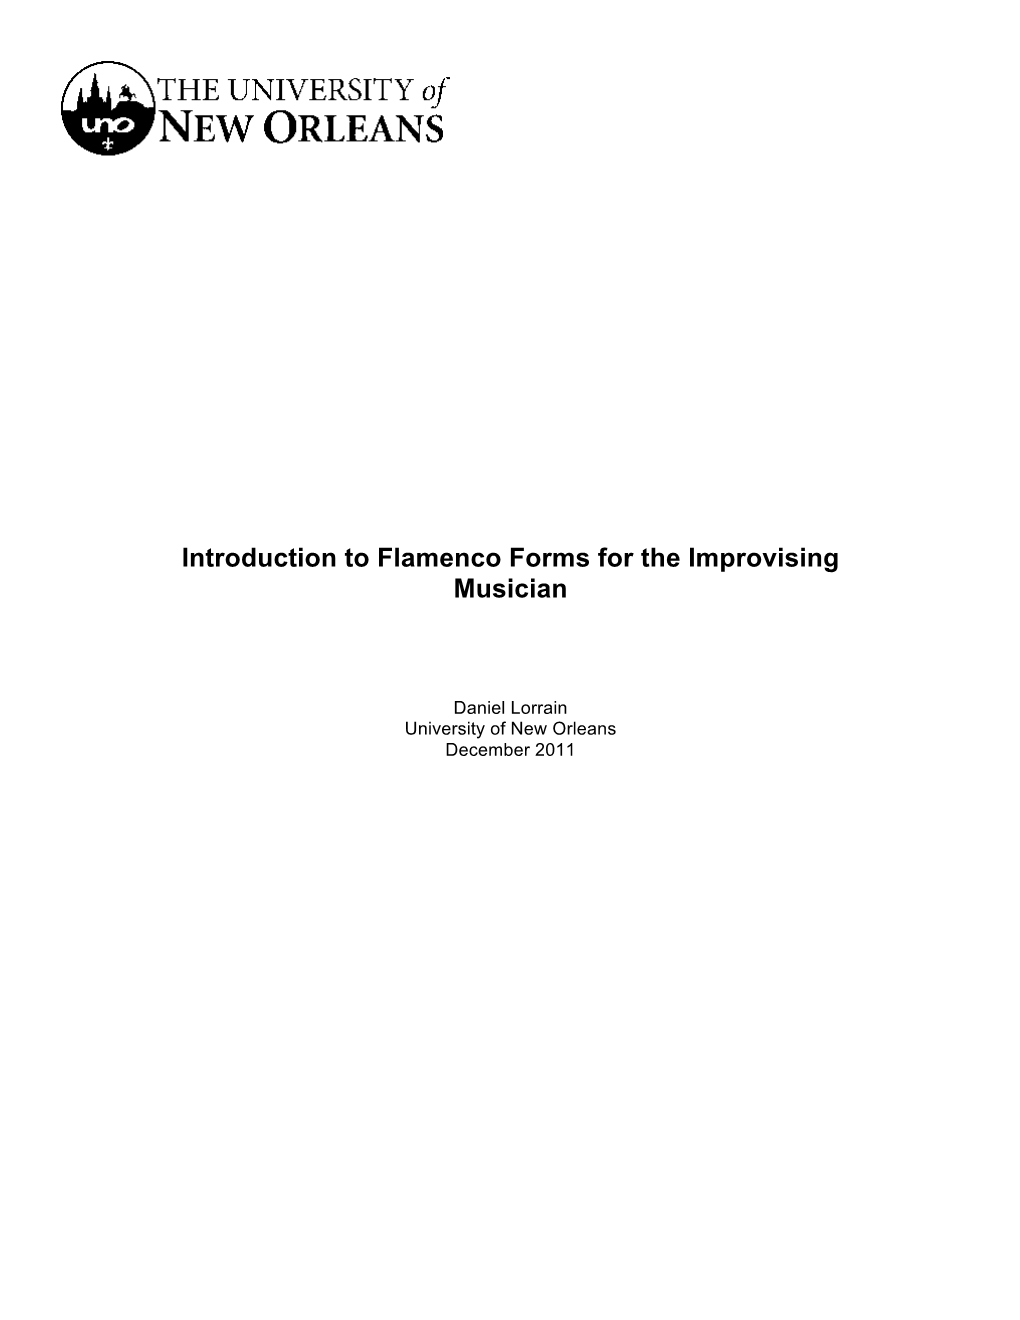 Introduction to Flamenco Forms for the Improvising Musician